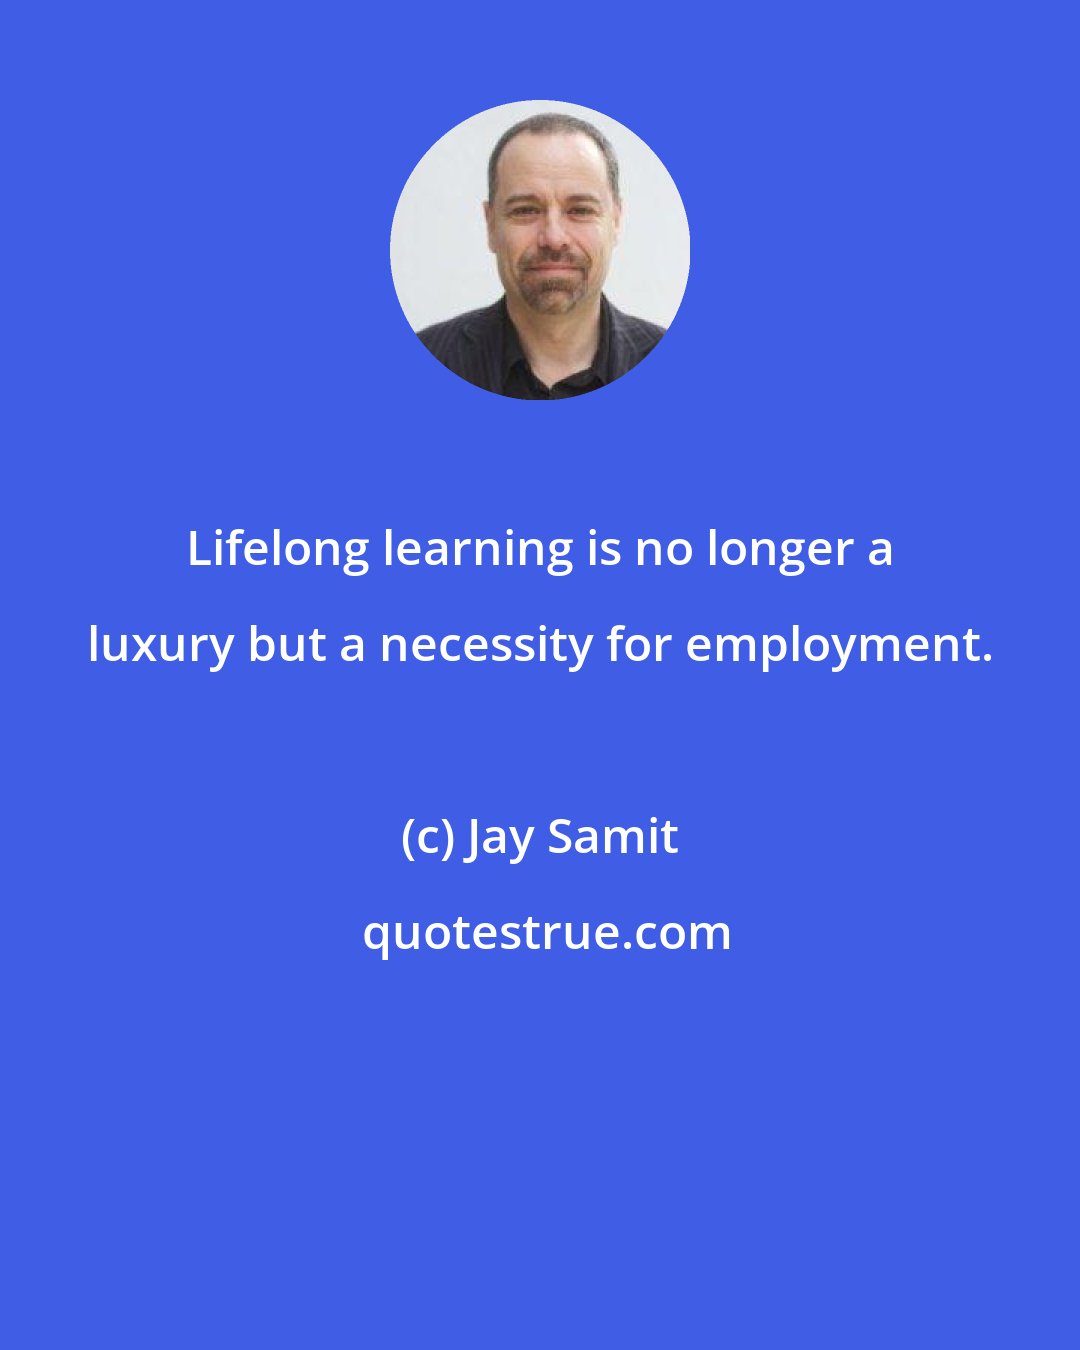 Jay Samit: Lifelong learning is no longer a luxury but a necessity for employment.